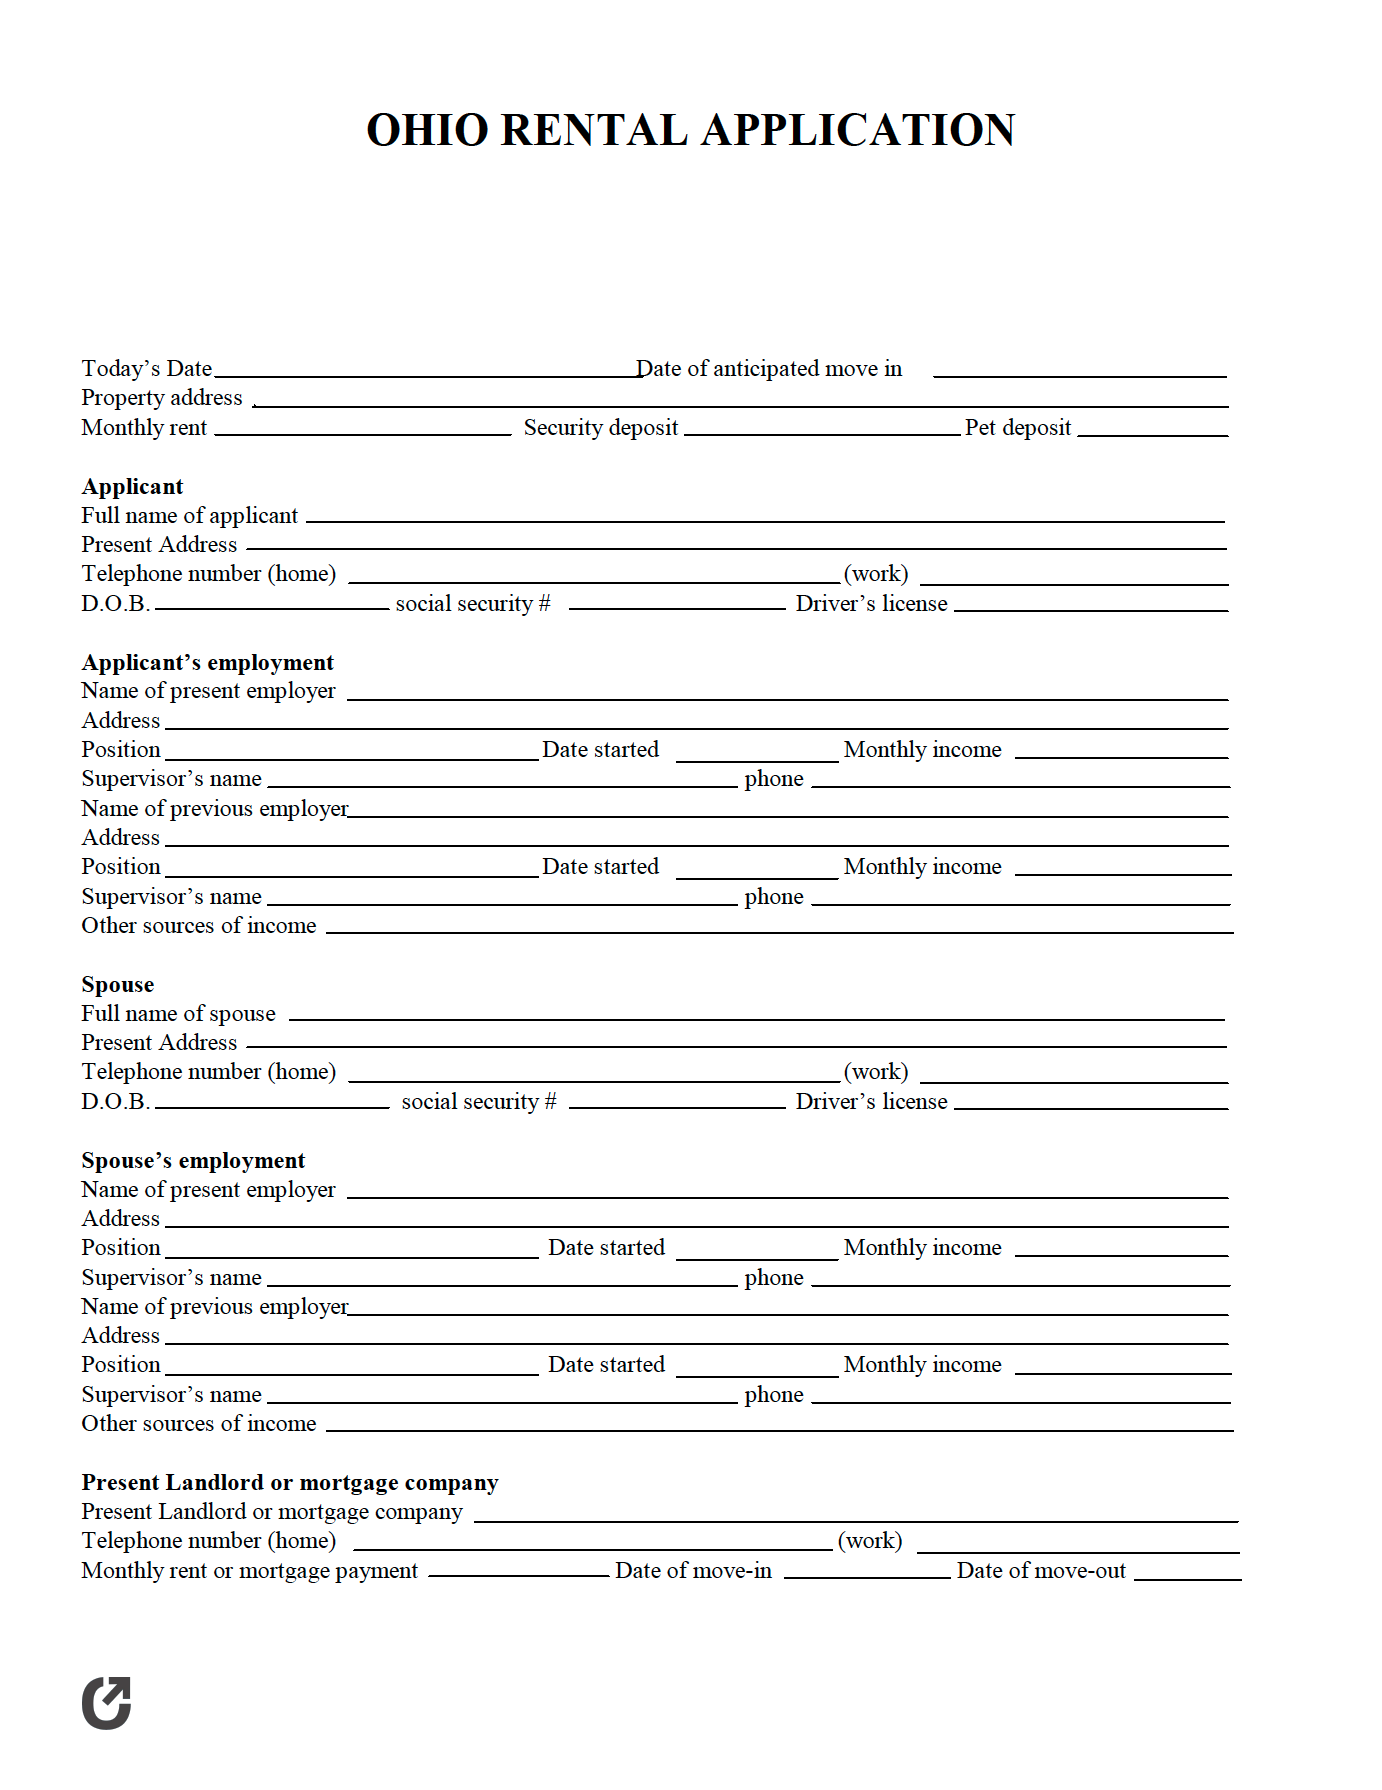 ohio-residential-leaserental-agreement-forms-template-download-ohio